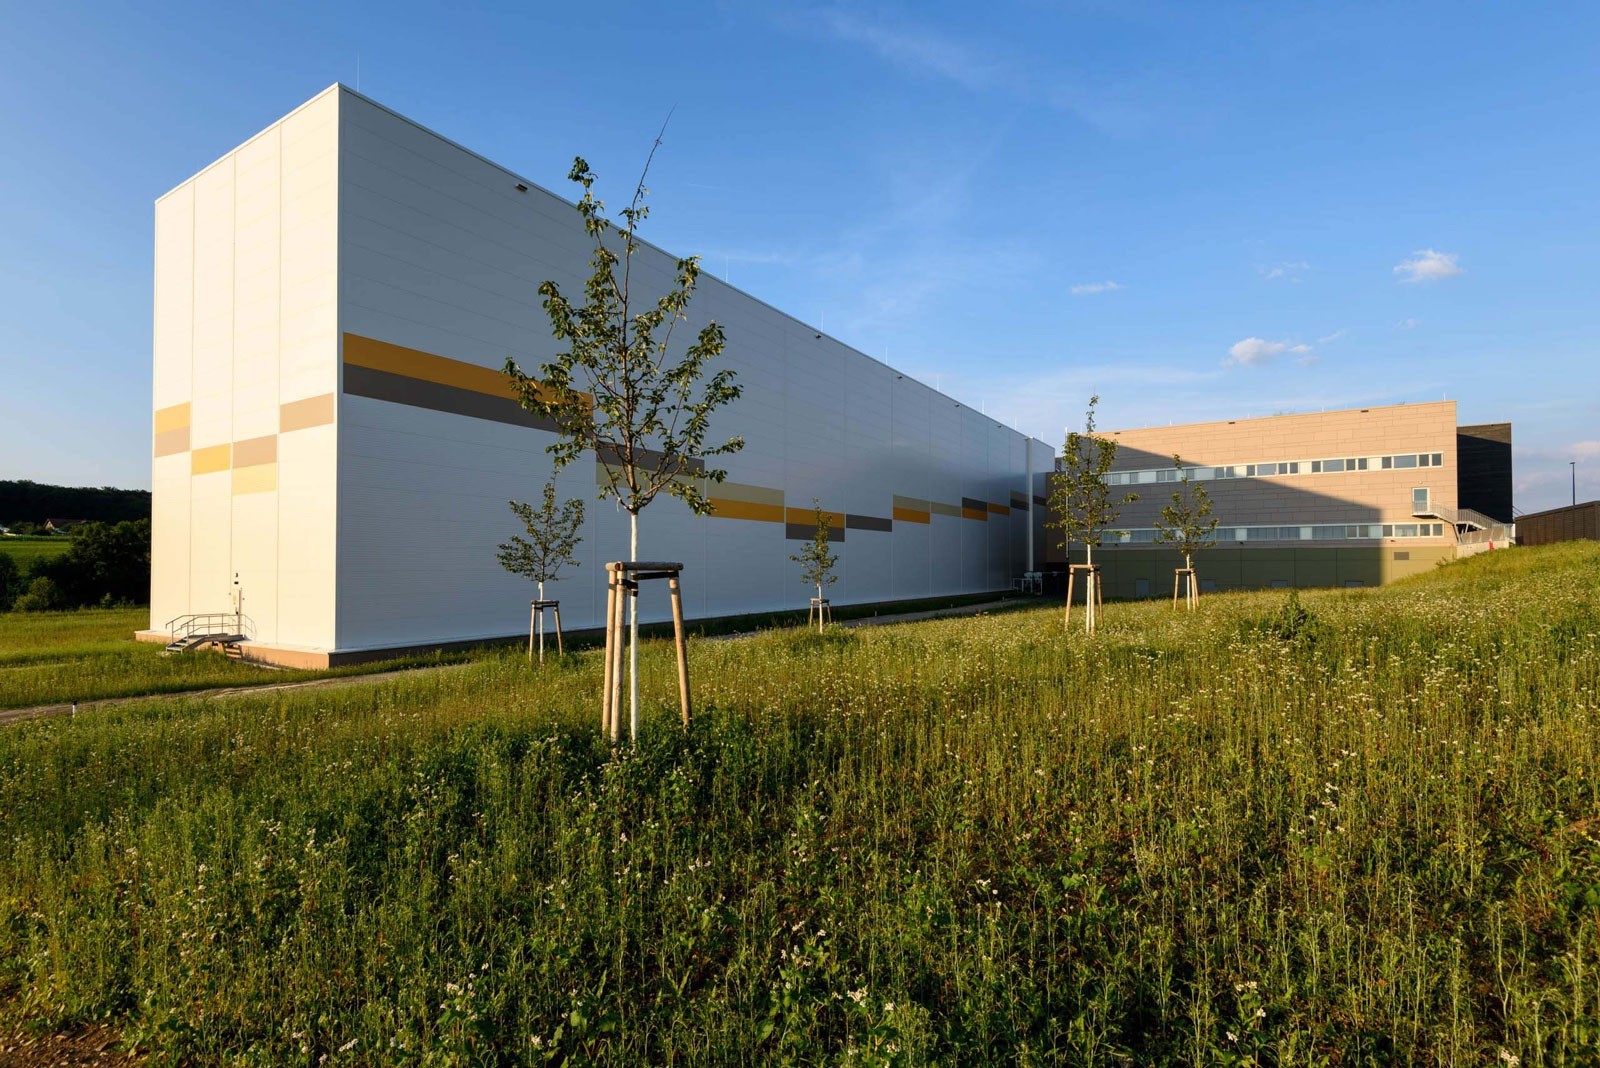 The new state-of-the-art distribution and logistics center on a greenfield site 